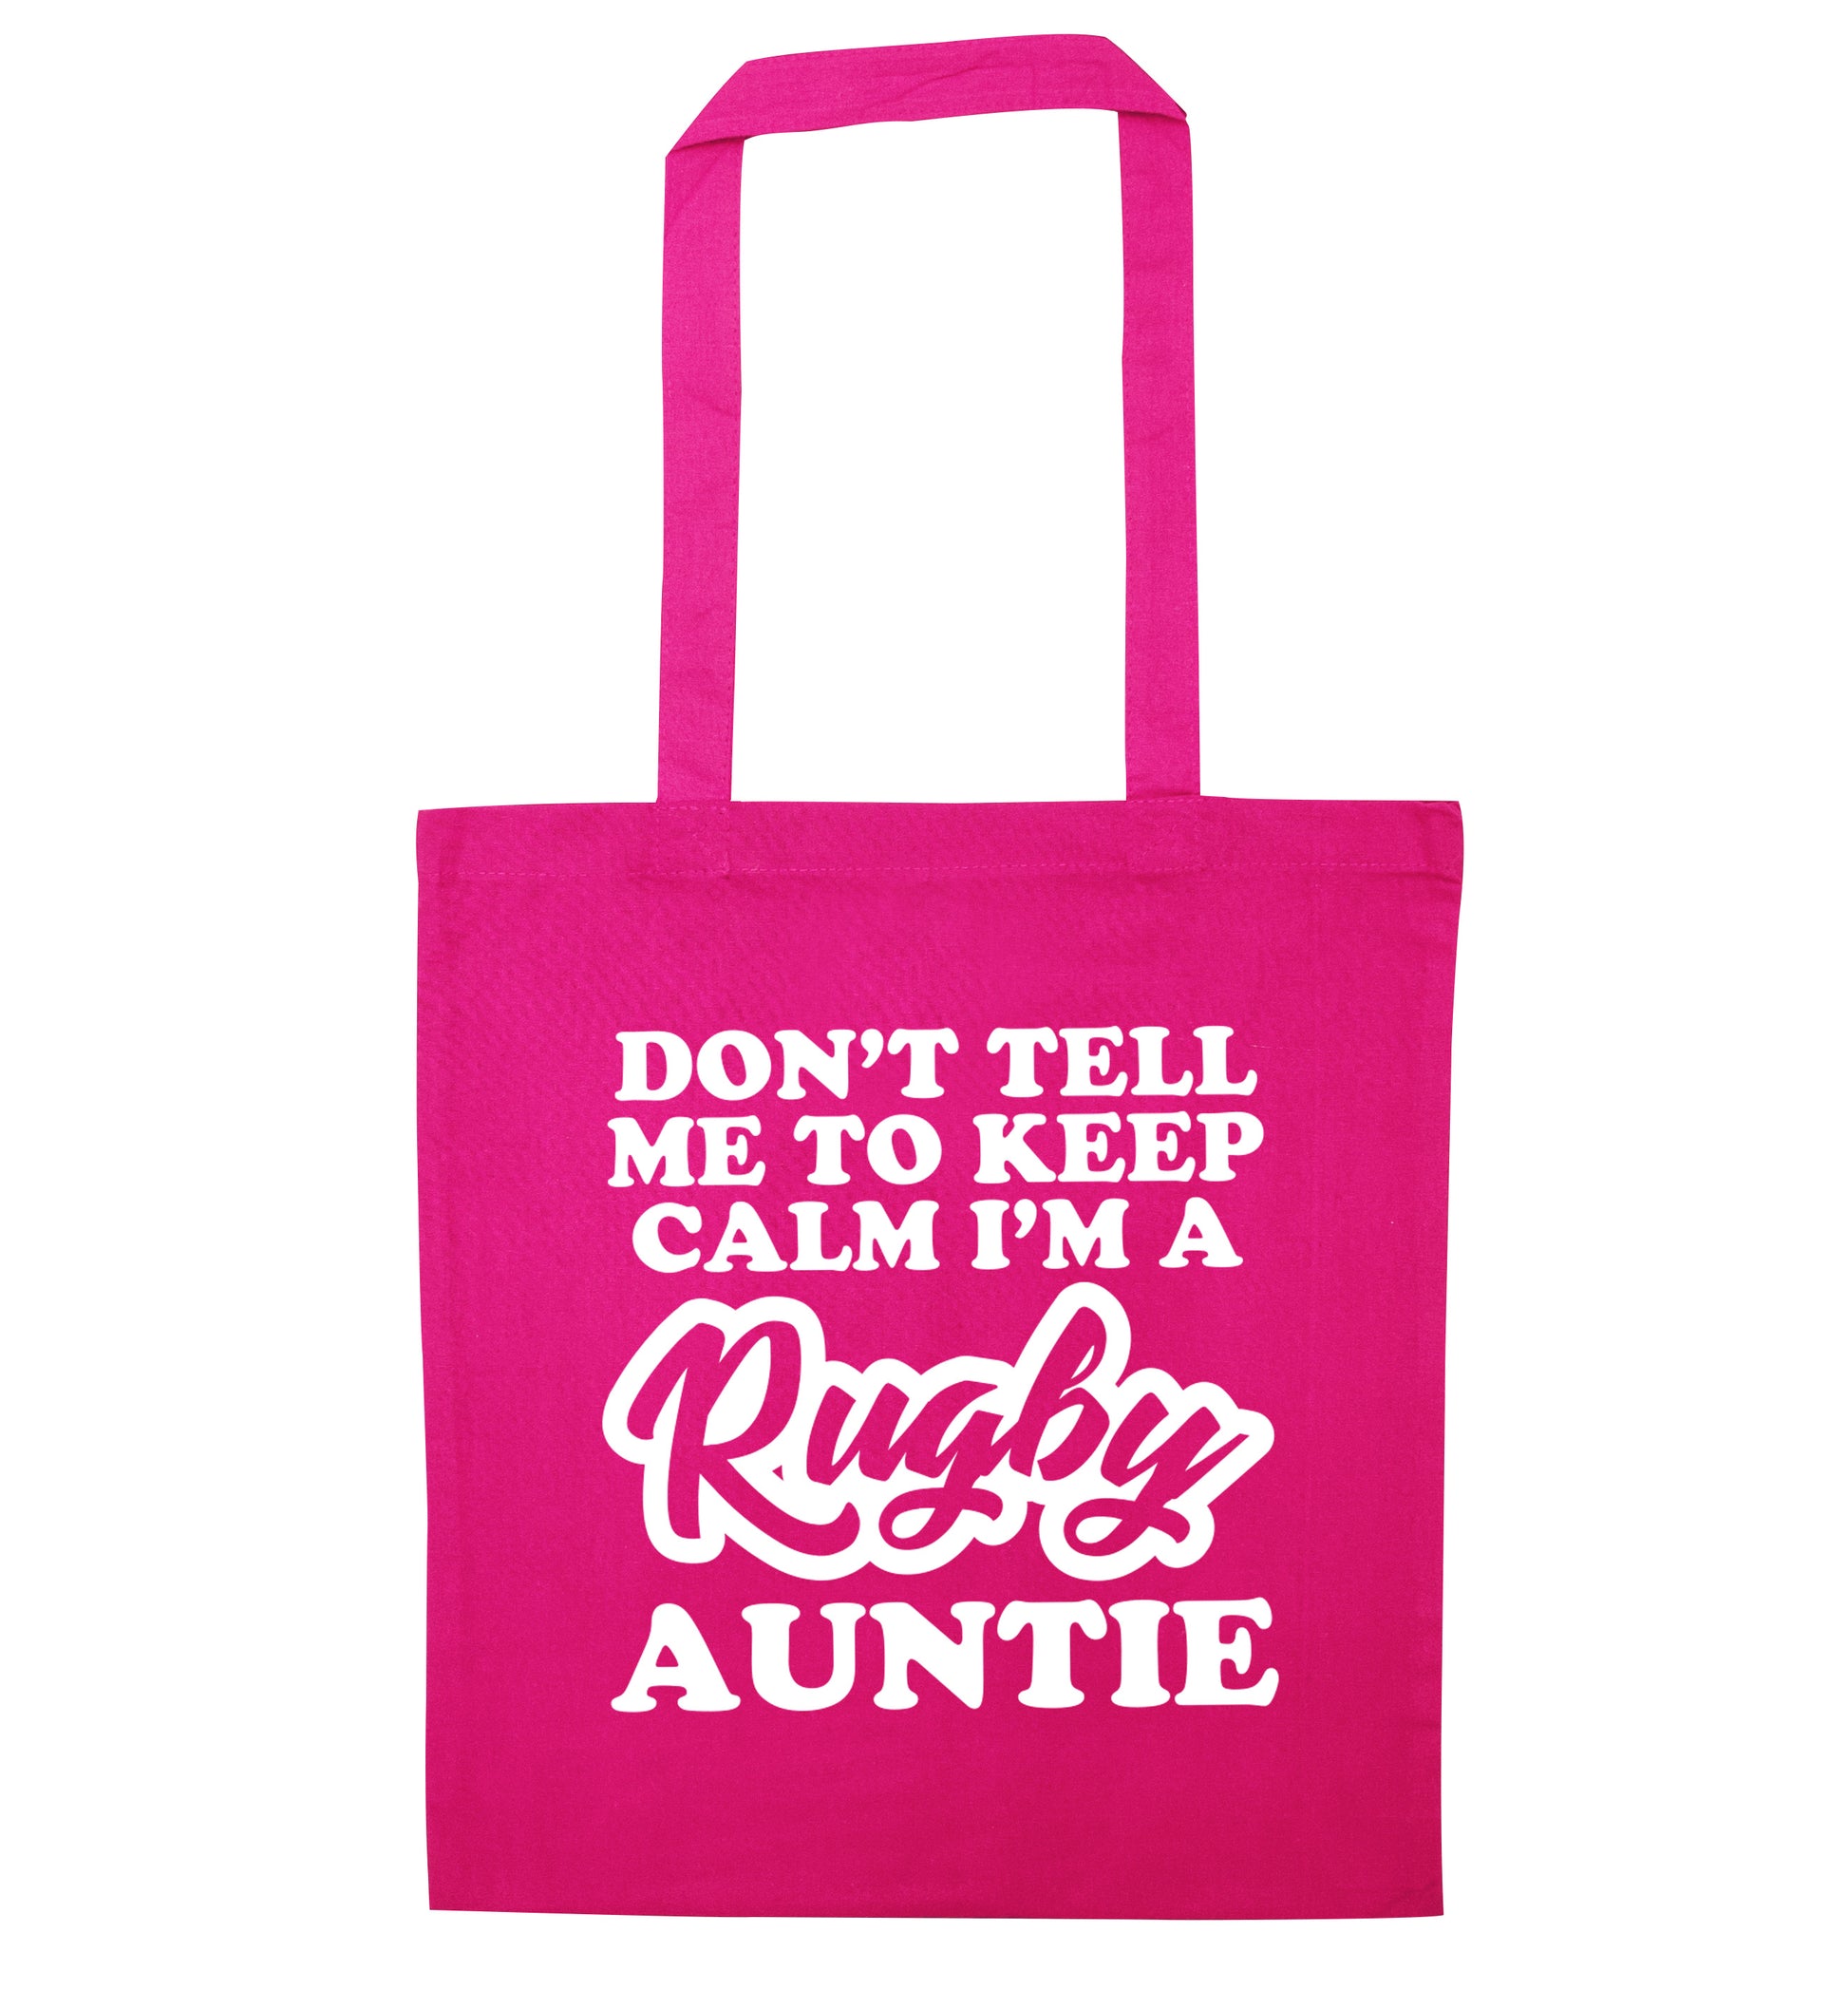 Don't tell me keep calm I'm a rugby auntie pink tote bag